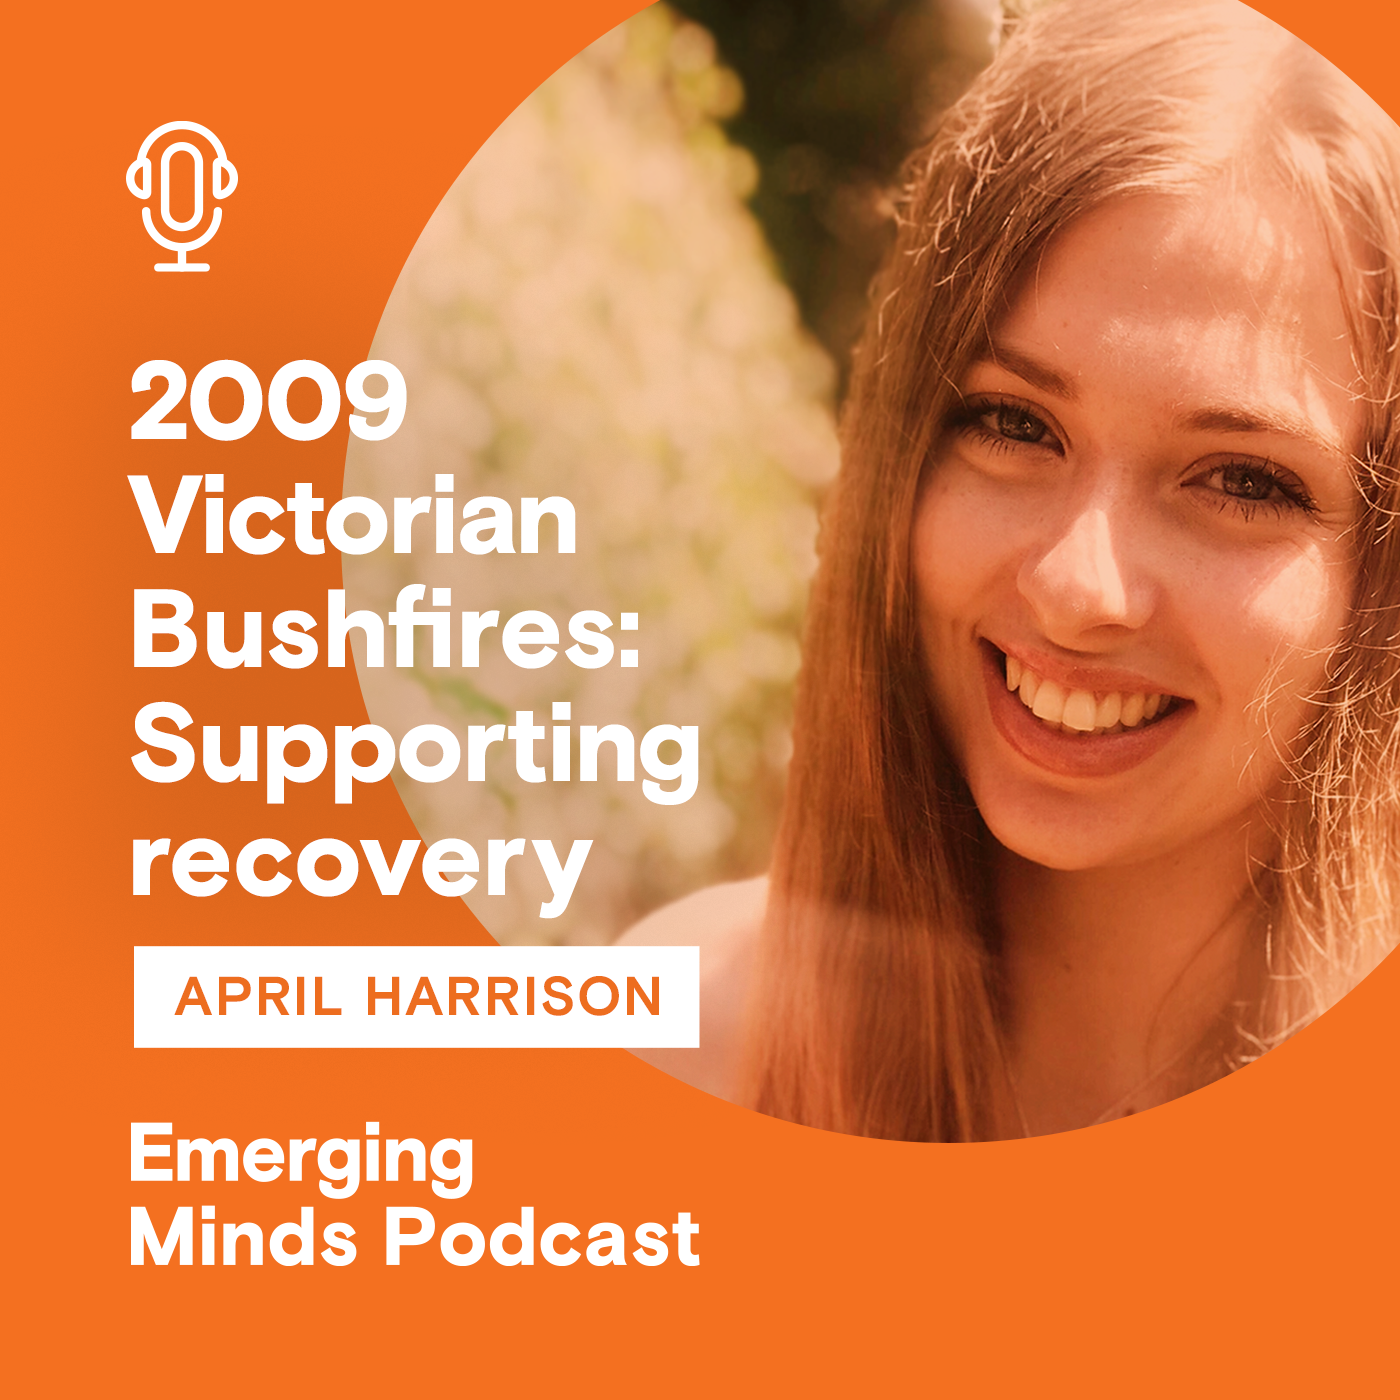 2009 Victorian Bushfires: Supporting recovery